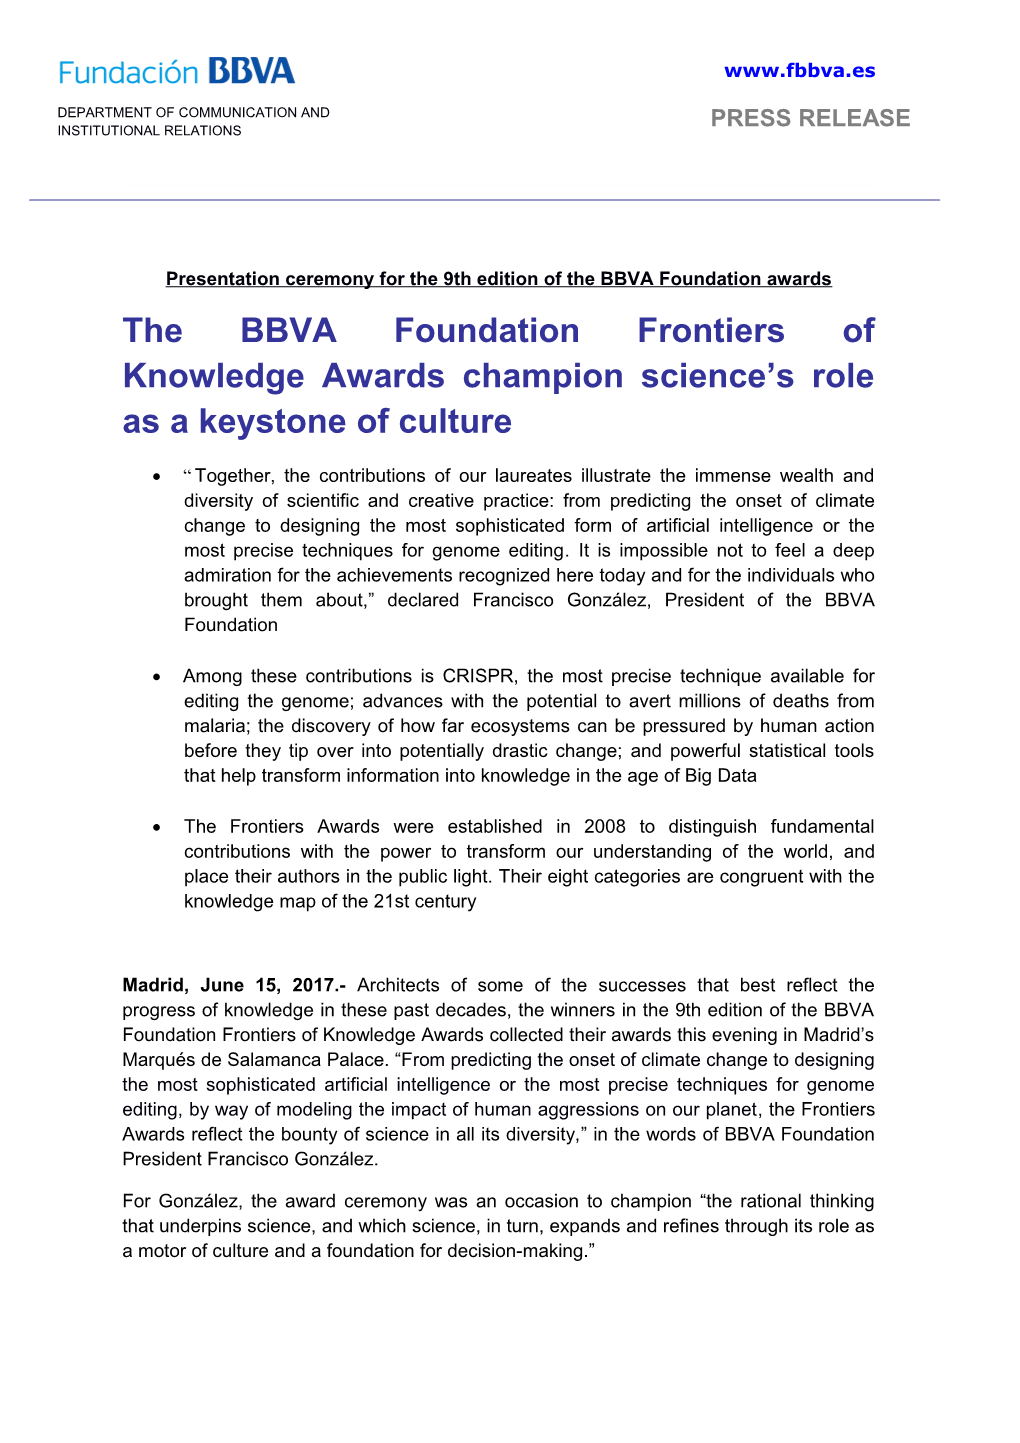 Presentation Ceremony for the 9Th Edition of the BBVA Foundation Awards